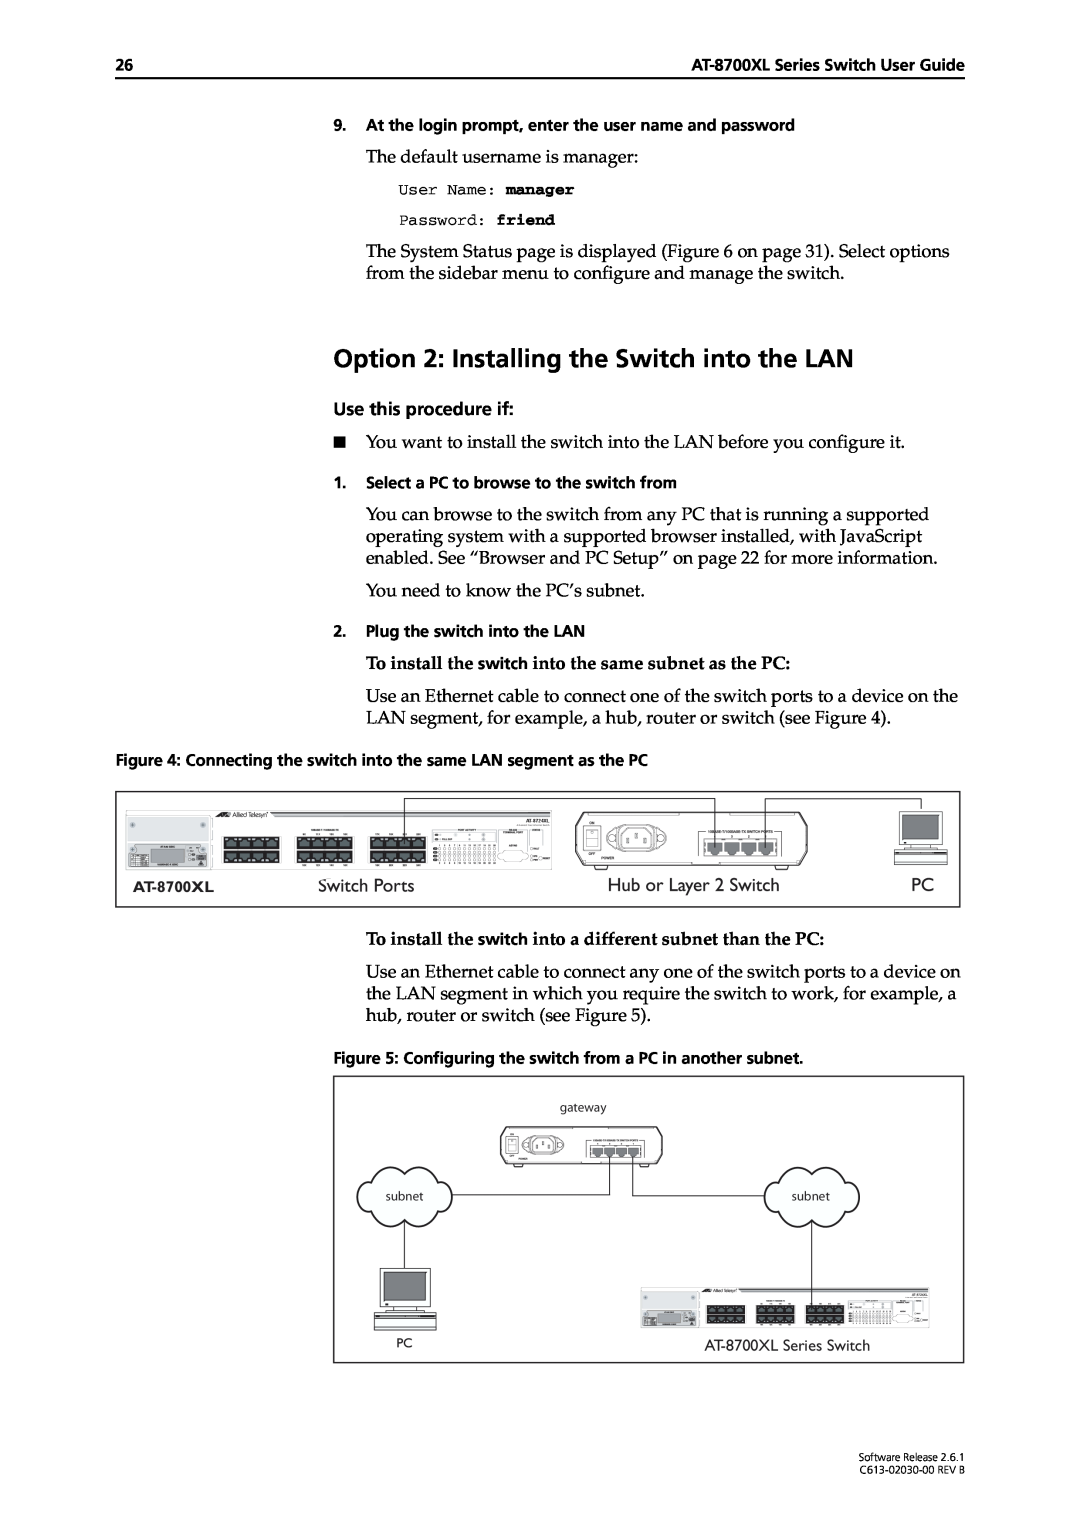 Allied Telesis at-8700xl series switch manual Option 2 Installing the Switch into the LAN, Use this procedure if 